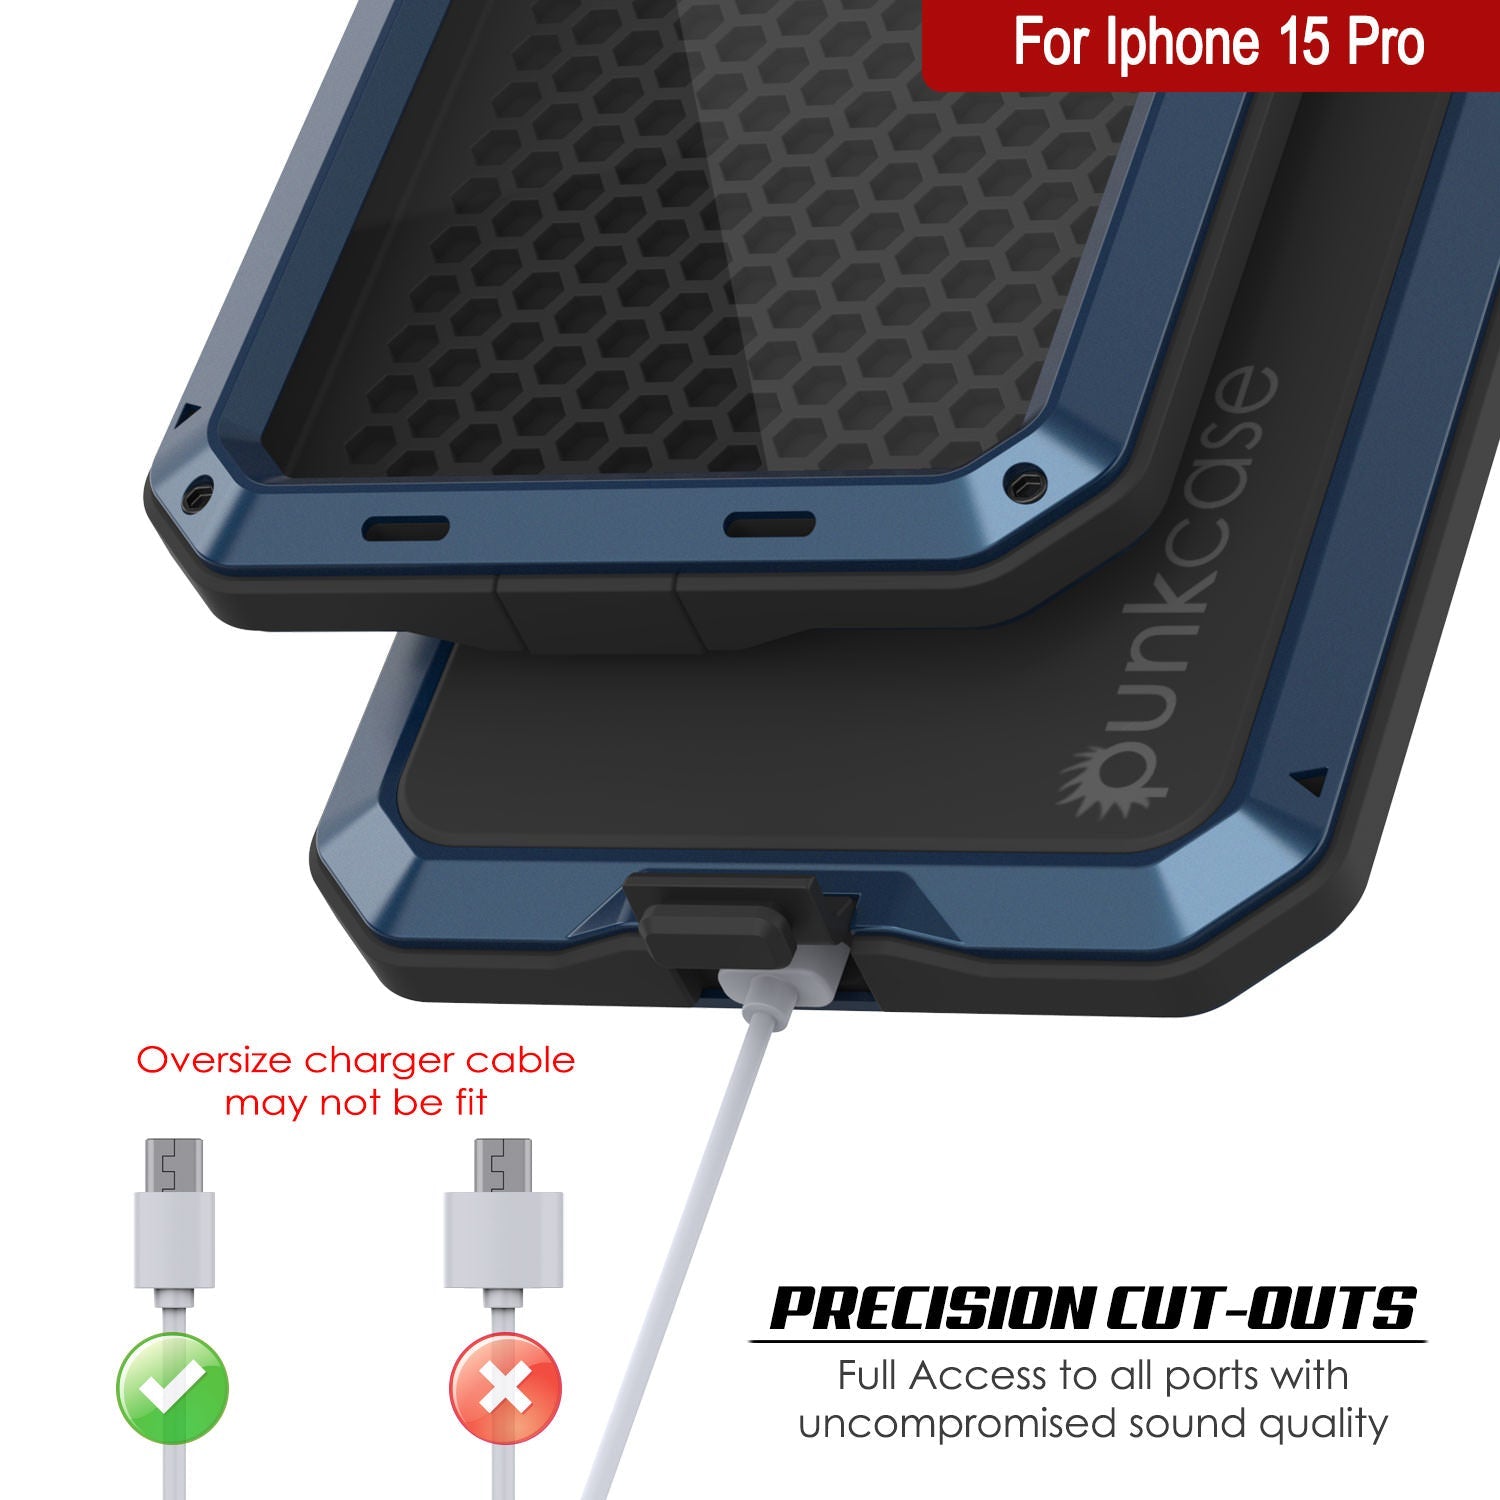 iPhone 15 Pro Metal Case, Heavy Duty Military Grade Armor Cover [shock proof] Full Body Hard [Blue]